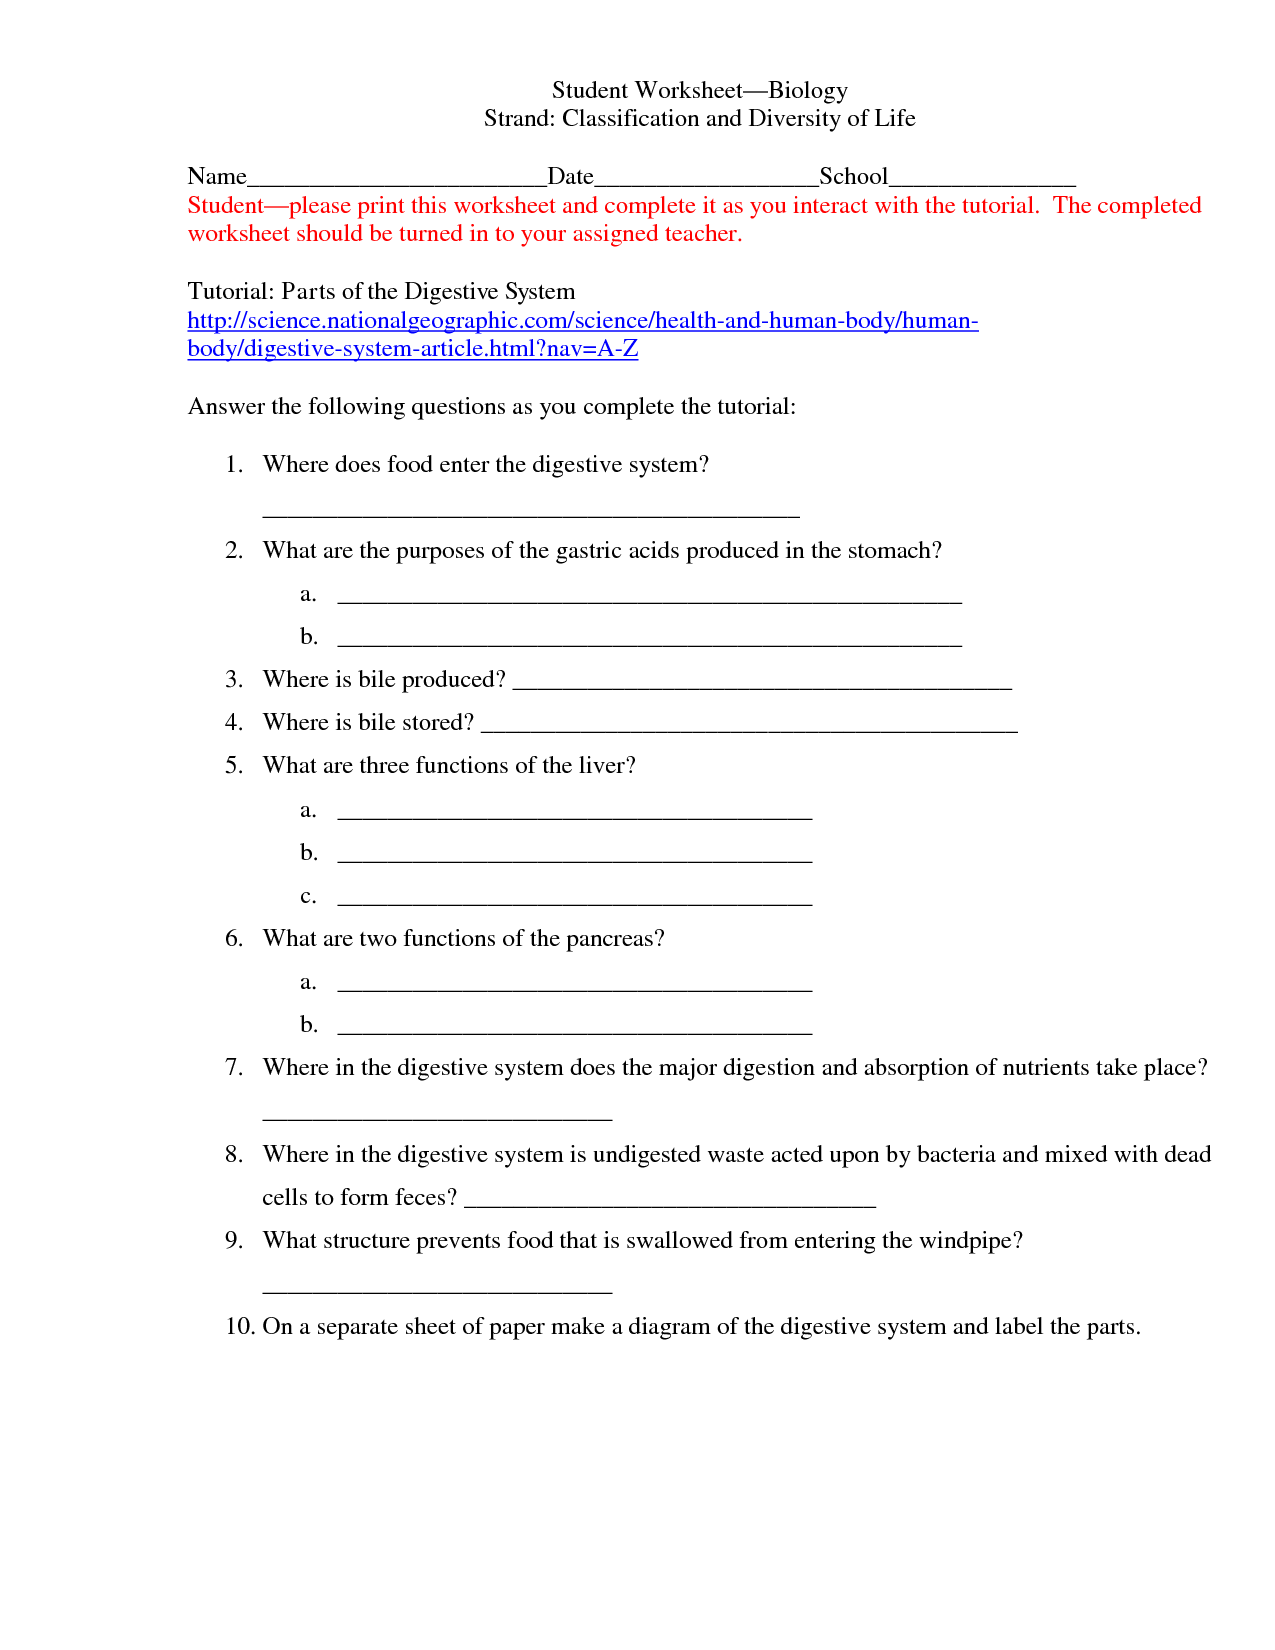 15-best-images-of-classification-worksheets-for-middle-school-animal-classification-worksheet